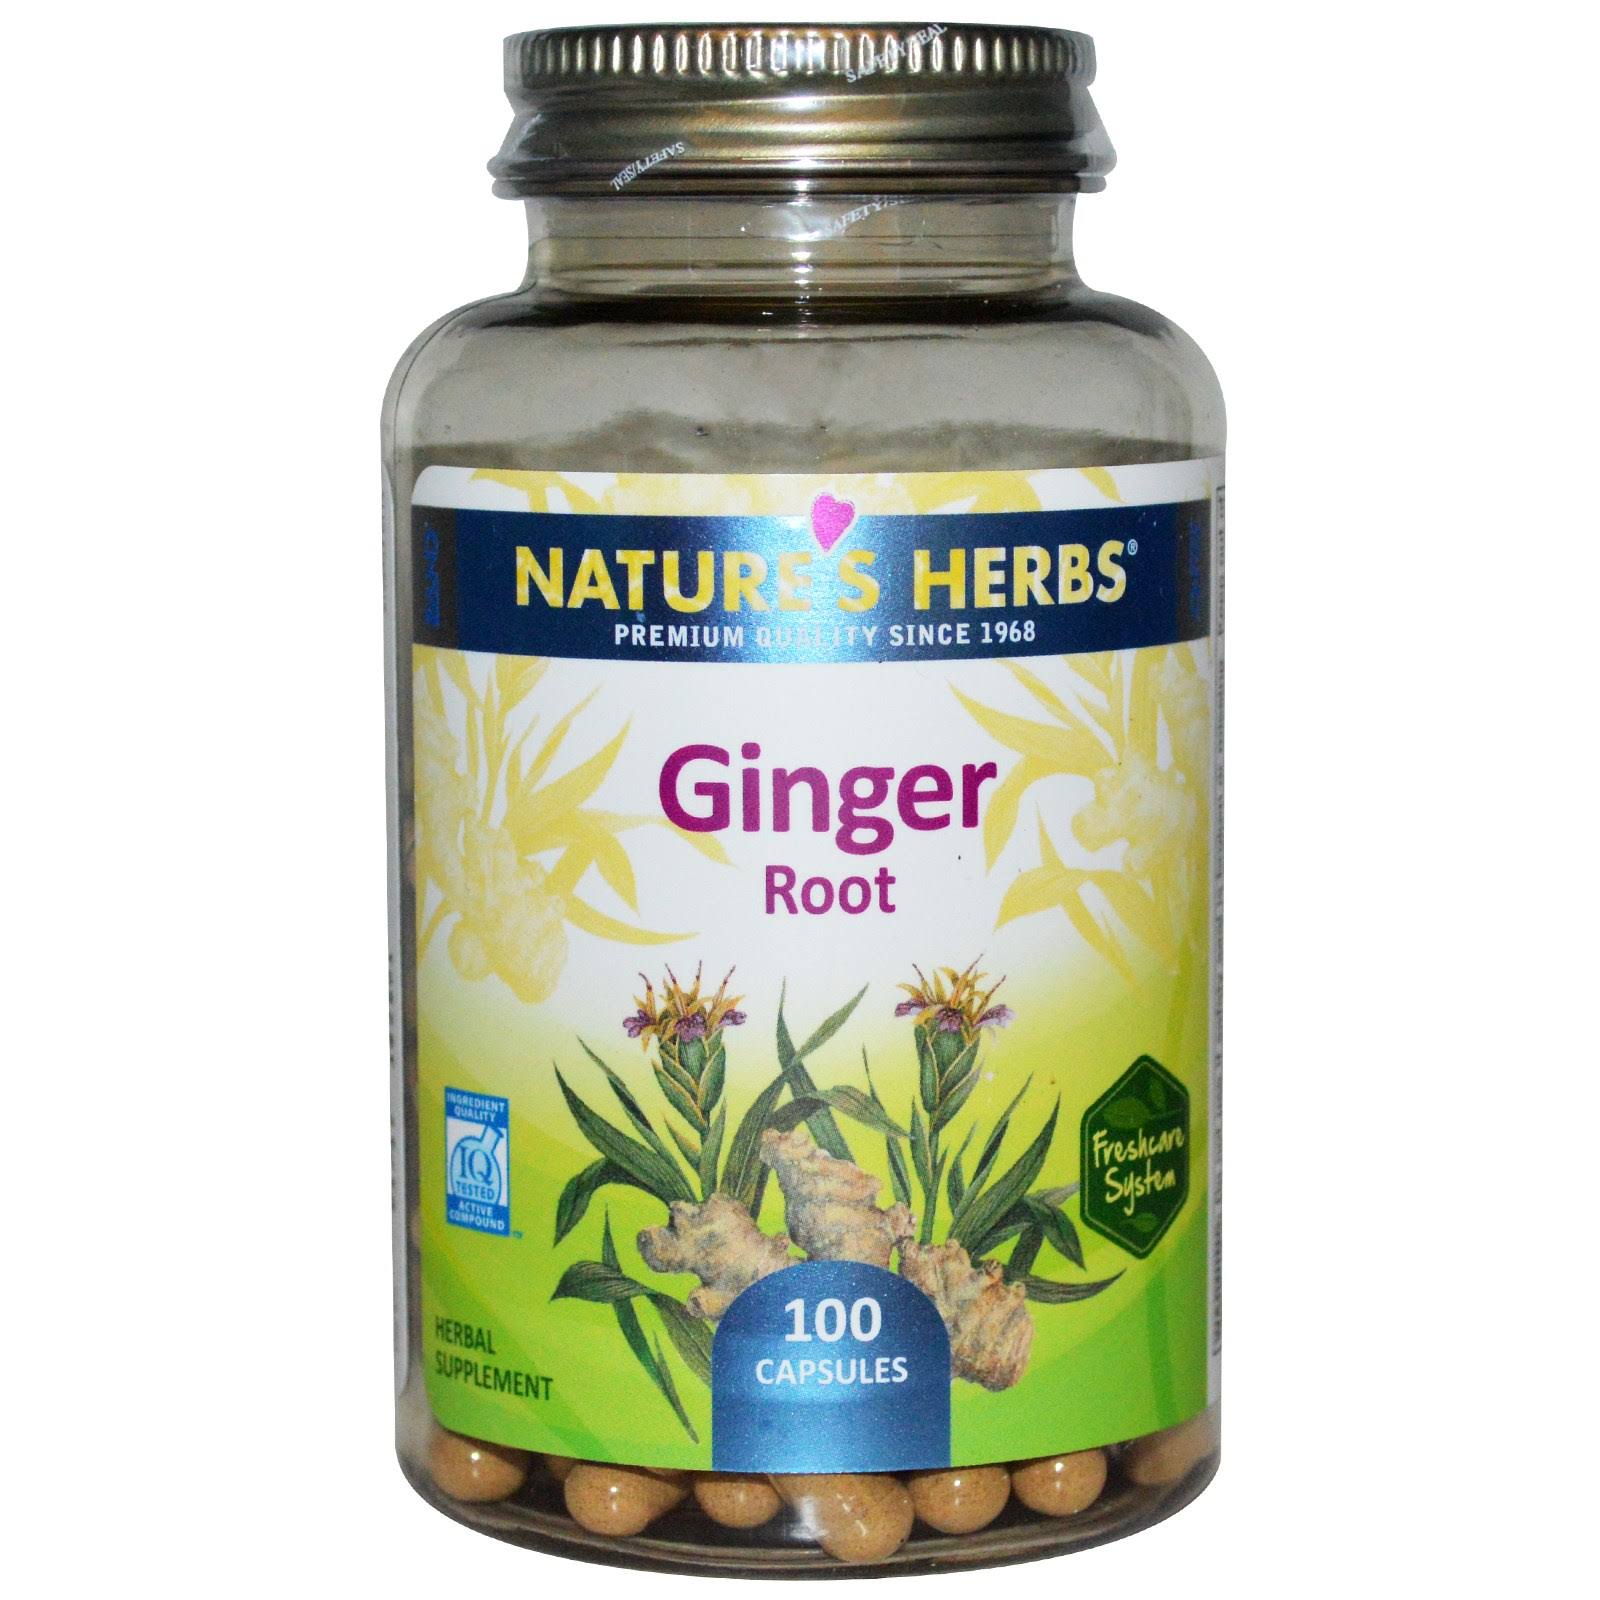 Nature's Herbs Ginger Root Supplement - 100 Capsules